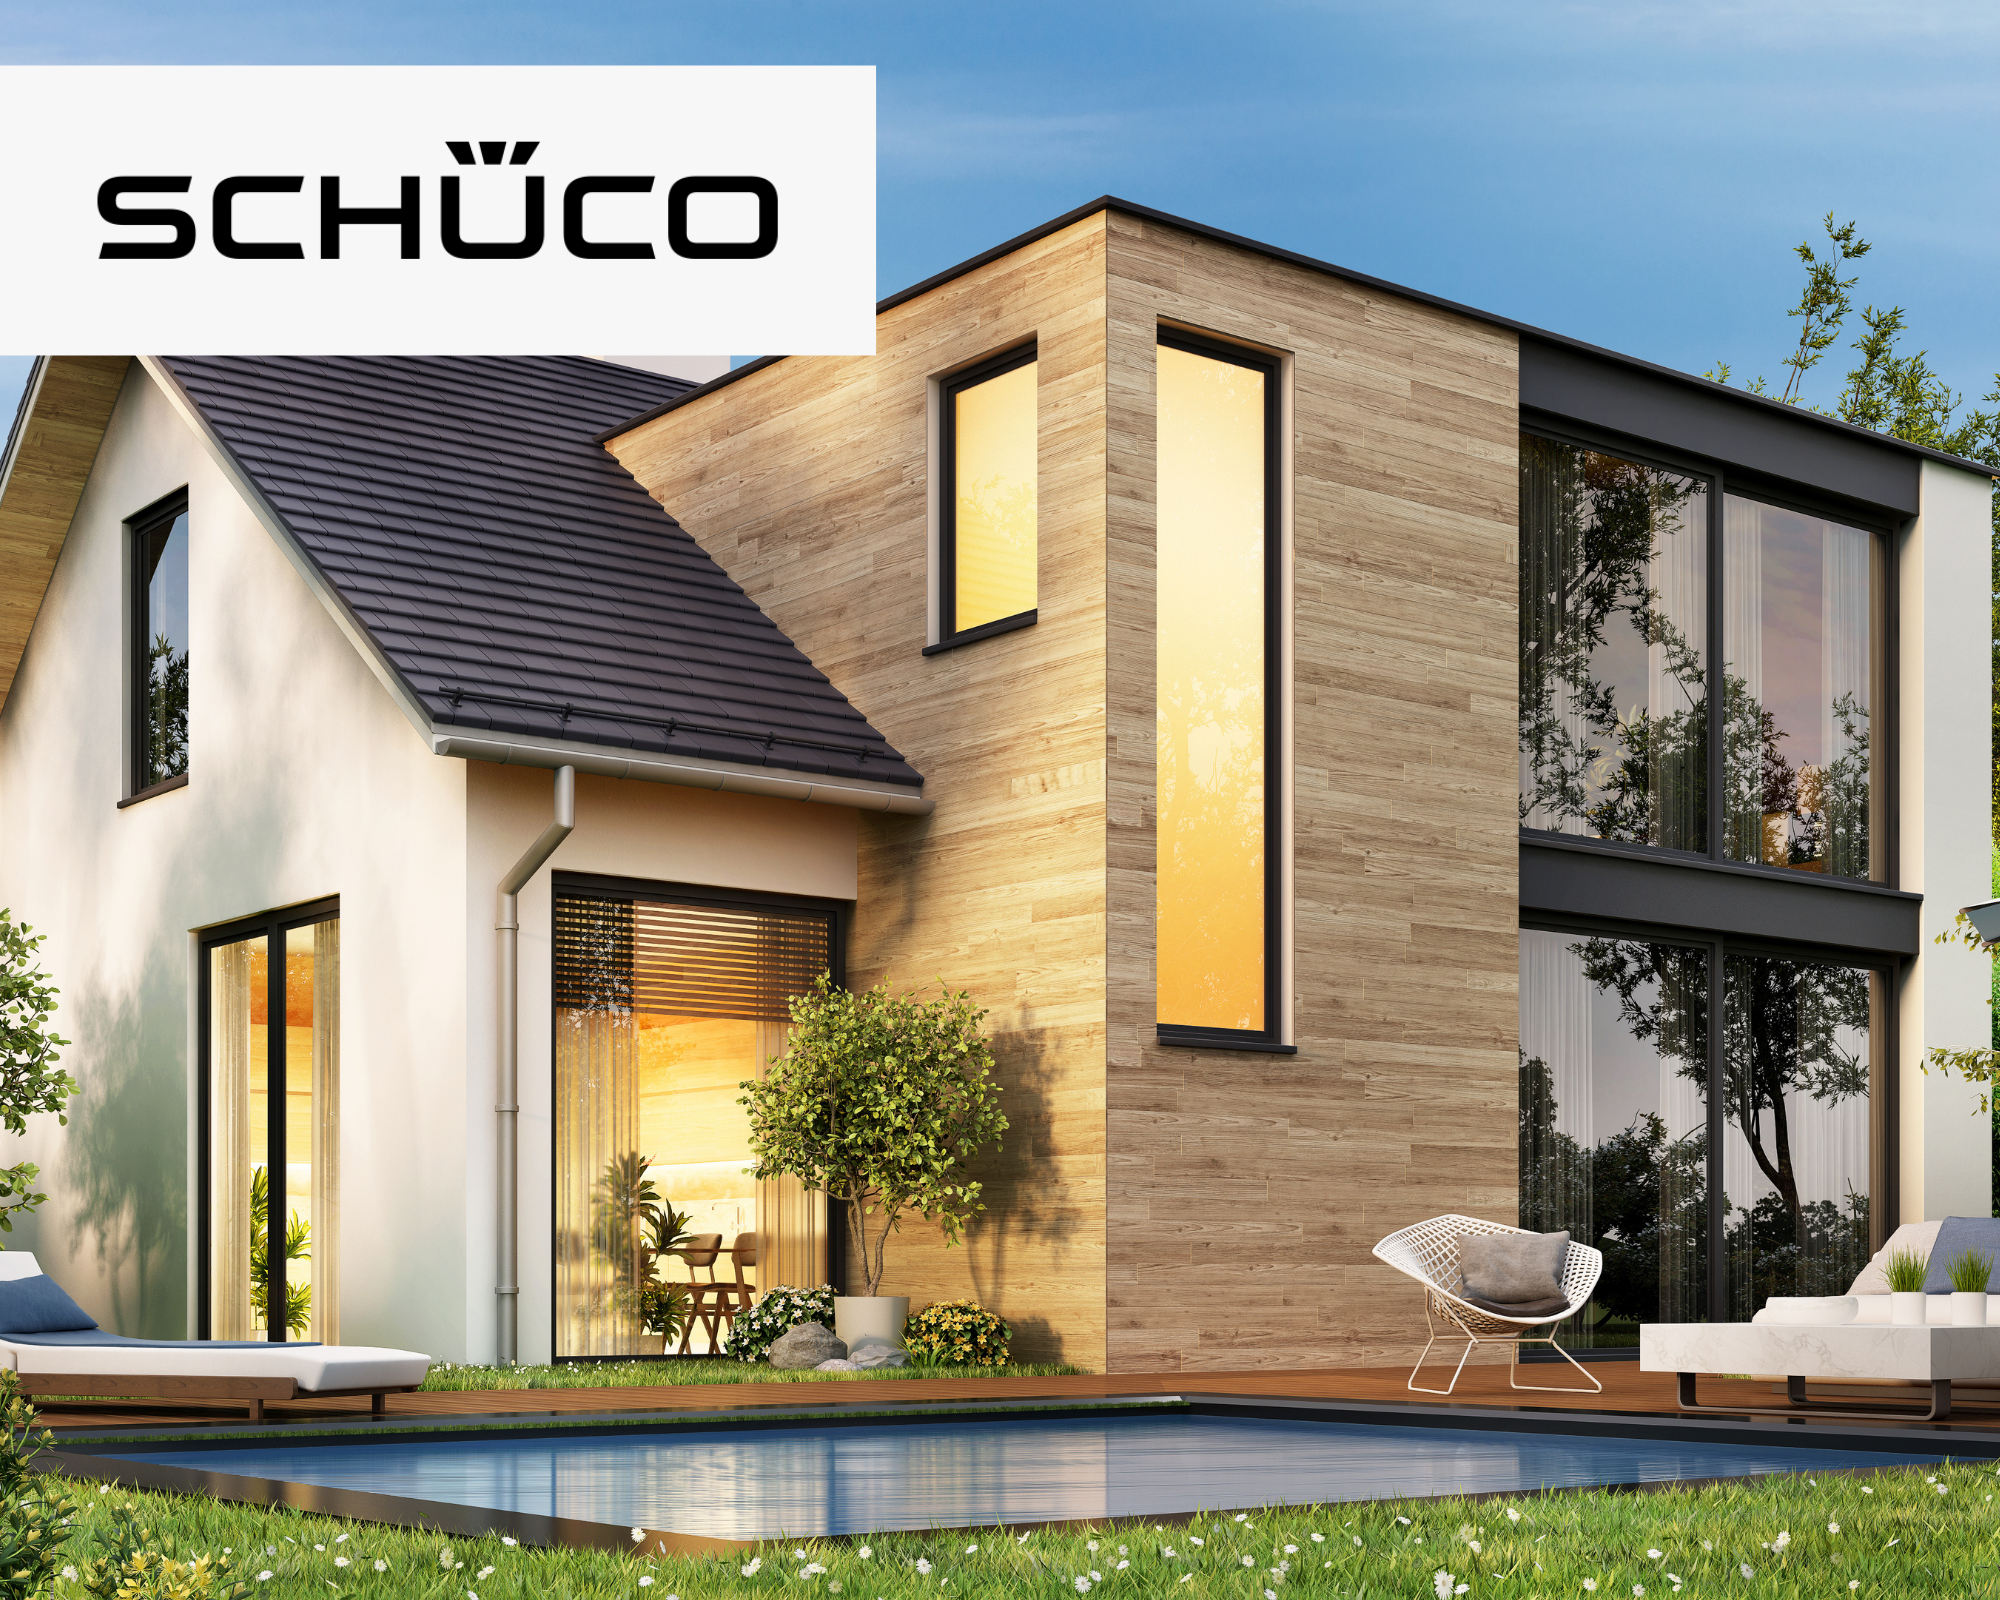 Schuco, Aluplast or Veka. We work with the best Polish manufacturers of windows and doors